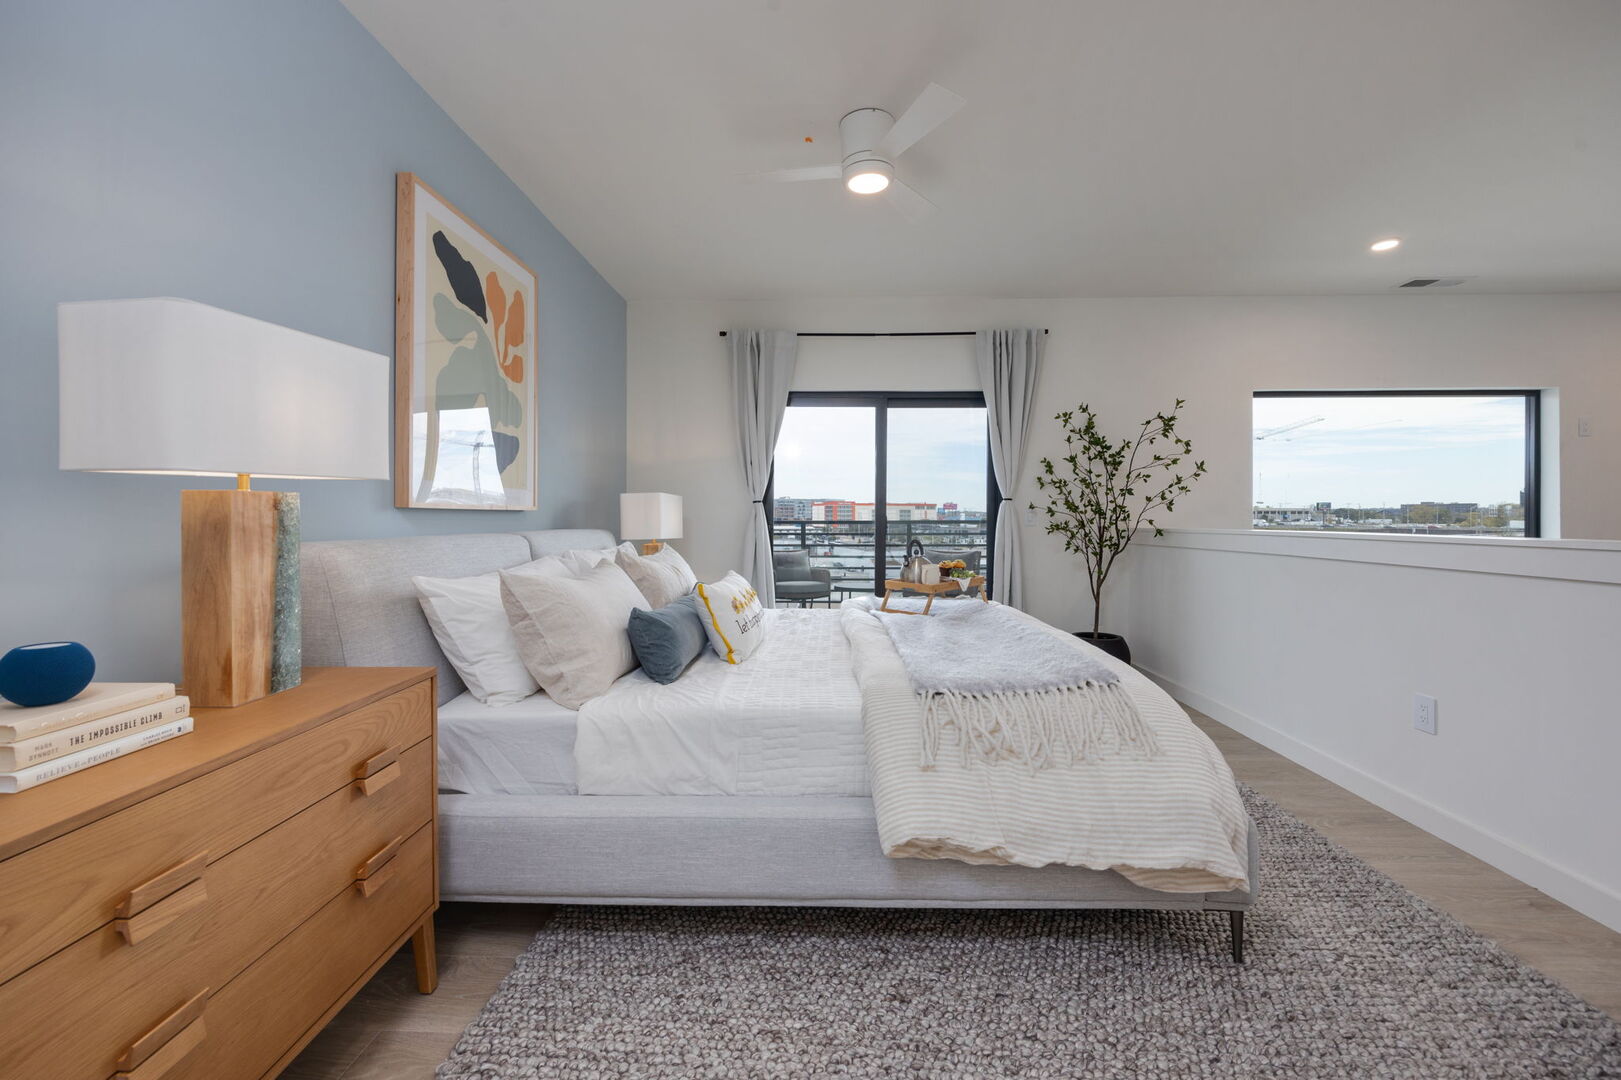 Upper Level: Primary bedroom with King bed, en-suite bathroom, walk-in closet, and its very own private balcony. The bedroom overlooks the living area.